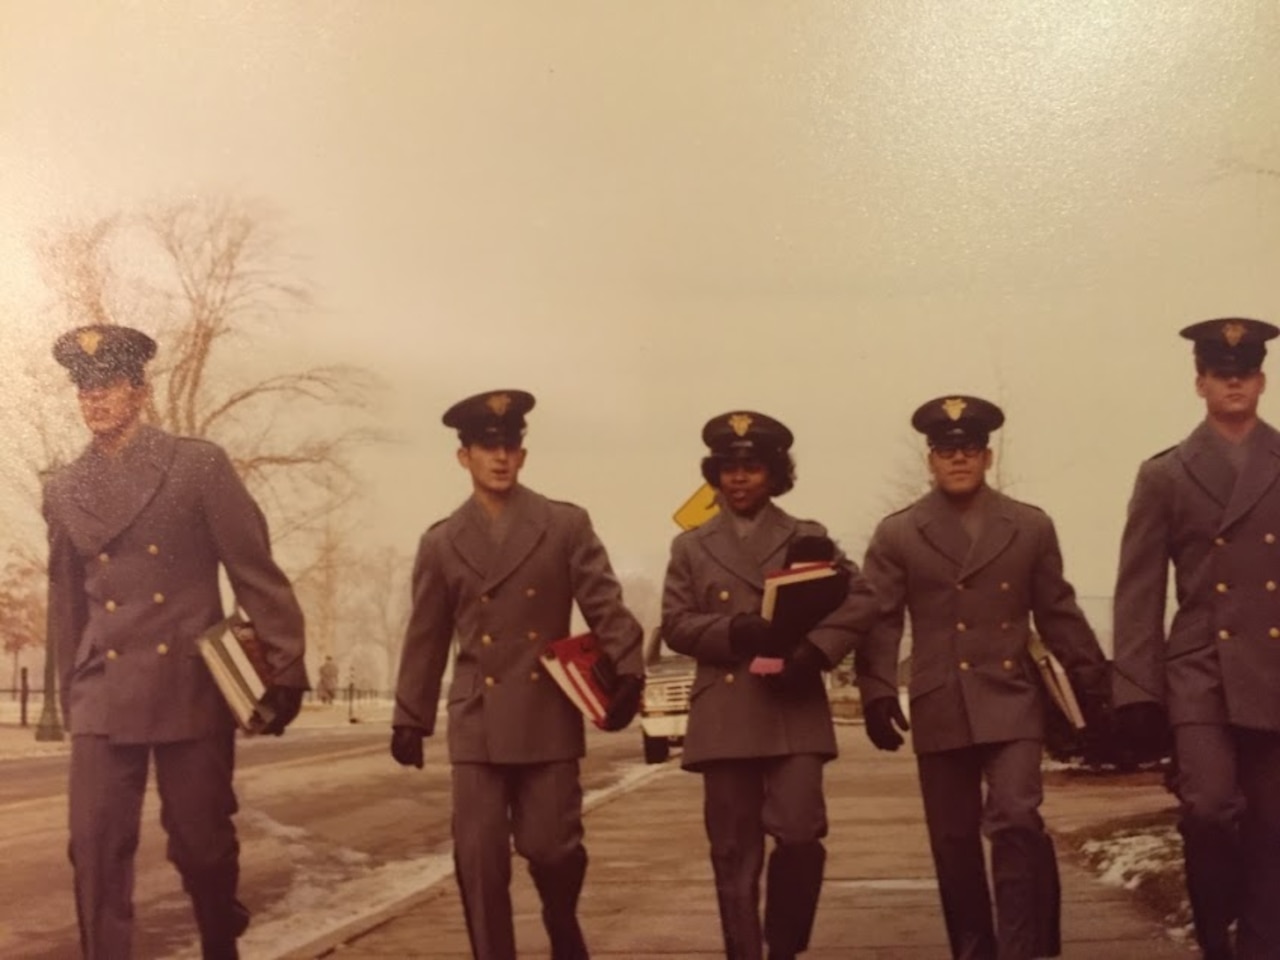 A group of 5 soldiers holding books walk together.